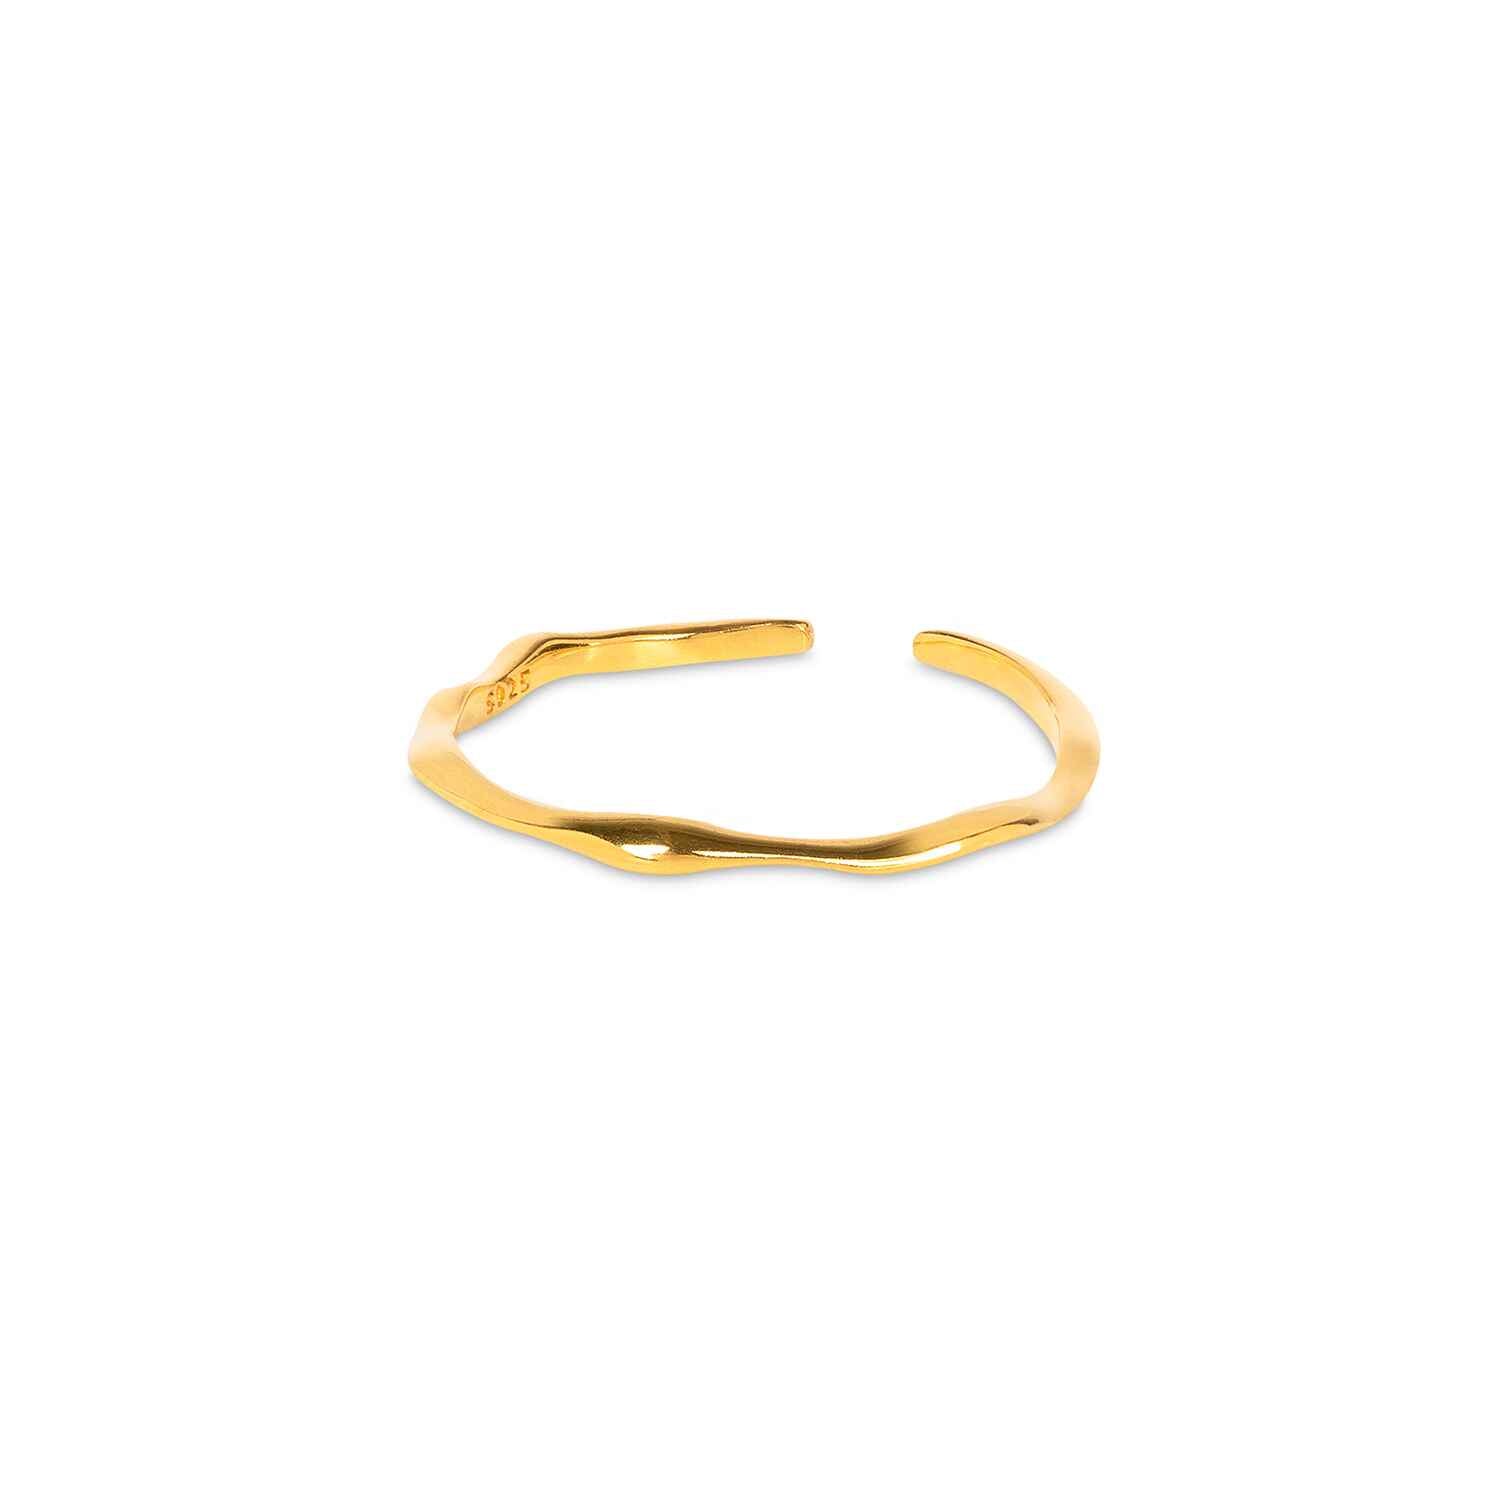 A staple piece through and through, the Bamboo Gold Stacking, handmade in sustainable 18k gold vermeil, is the perfect addition to any stack. It features a simple and elegant wavy design, made to be layered with your other Amadeus favourites.